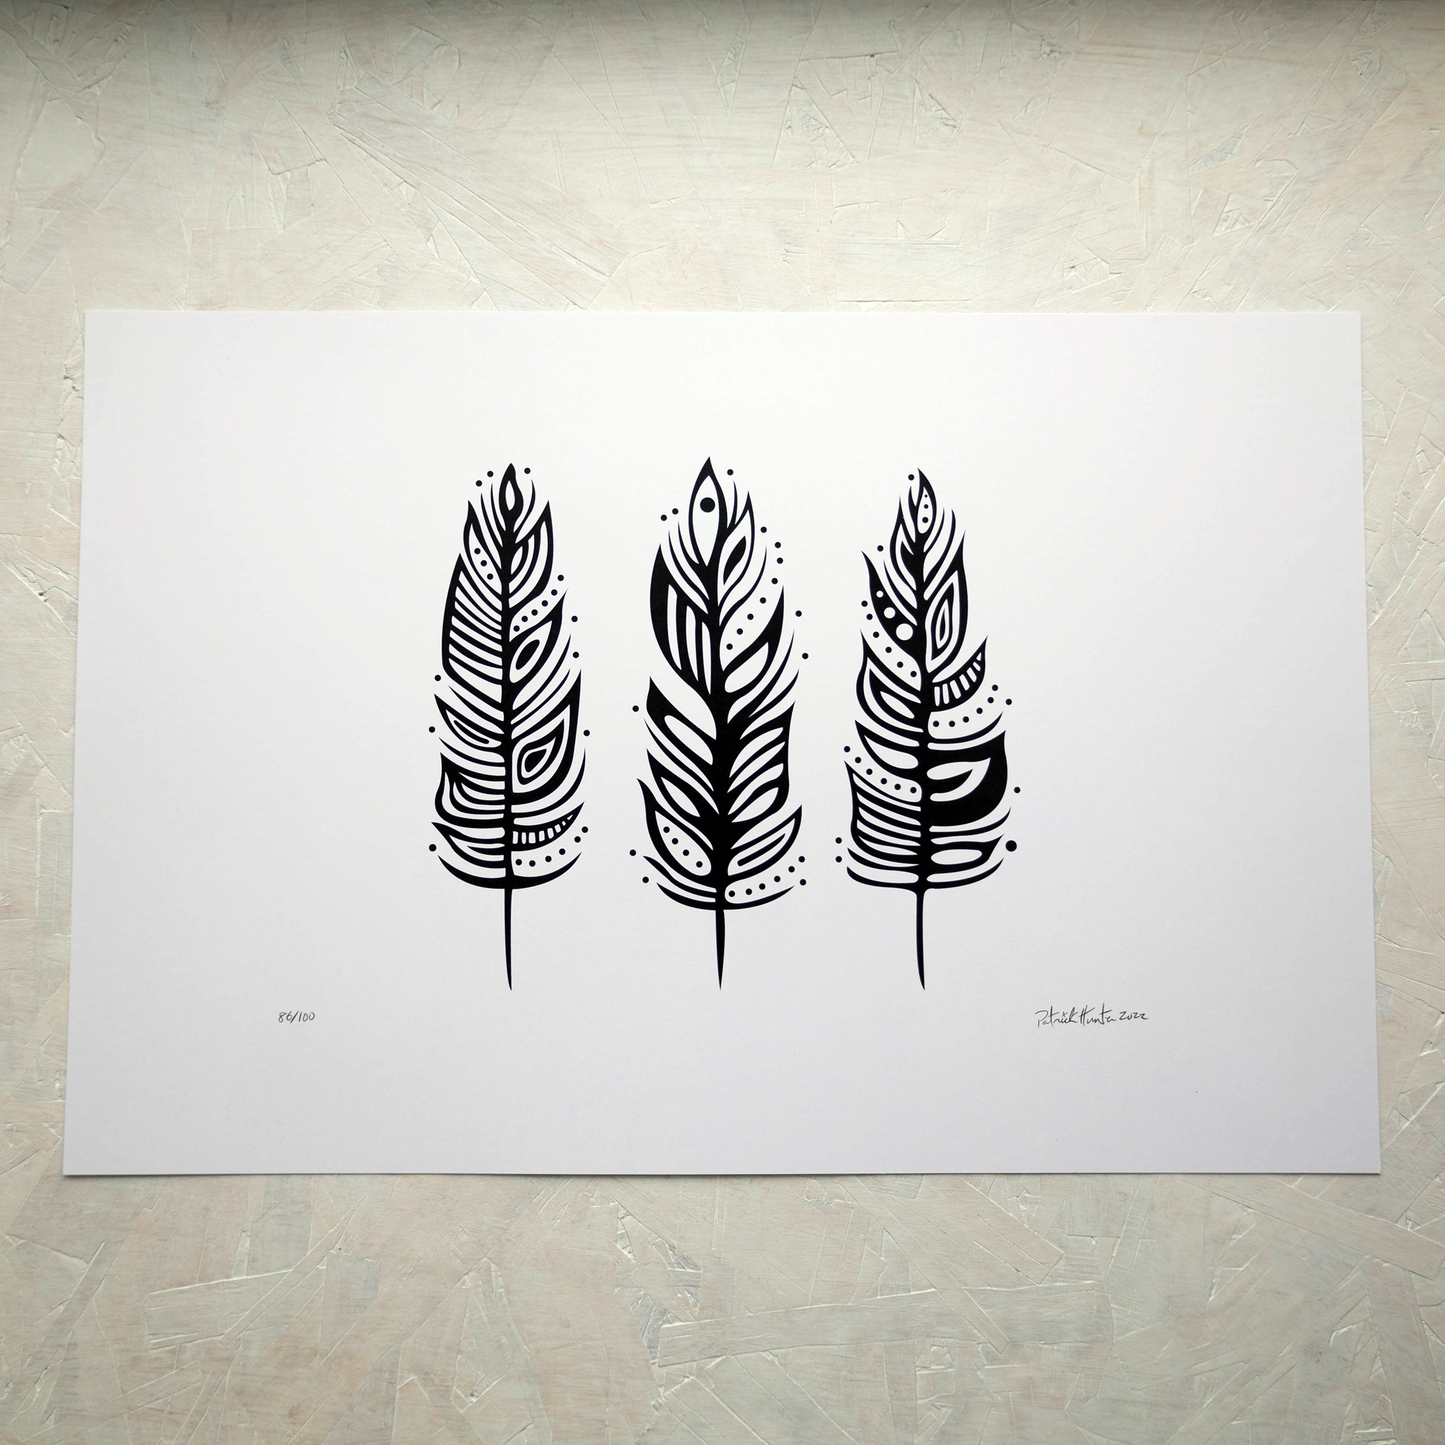 Print of Patrick Hunter's painting of three feathers, black on white, woodland art style.